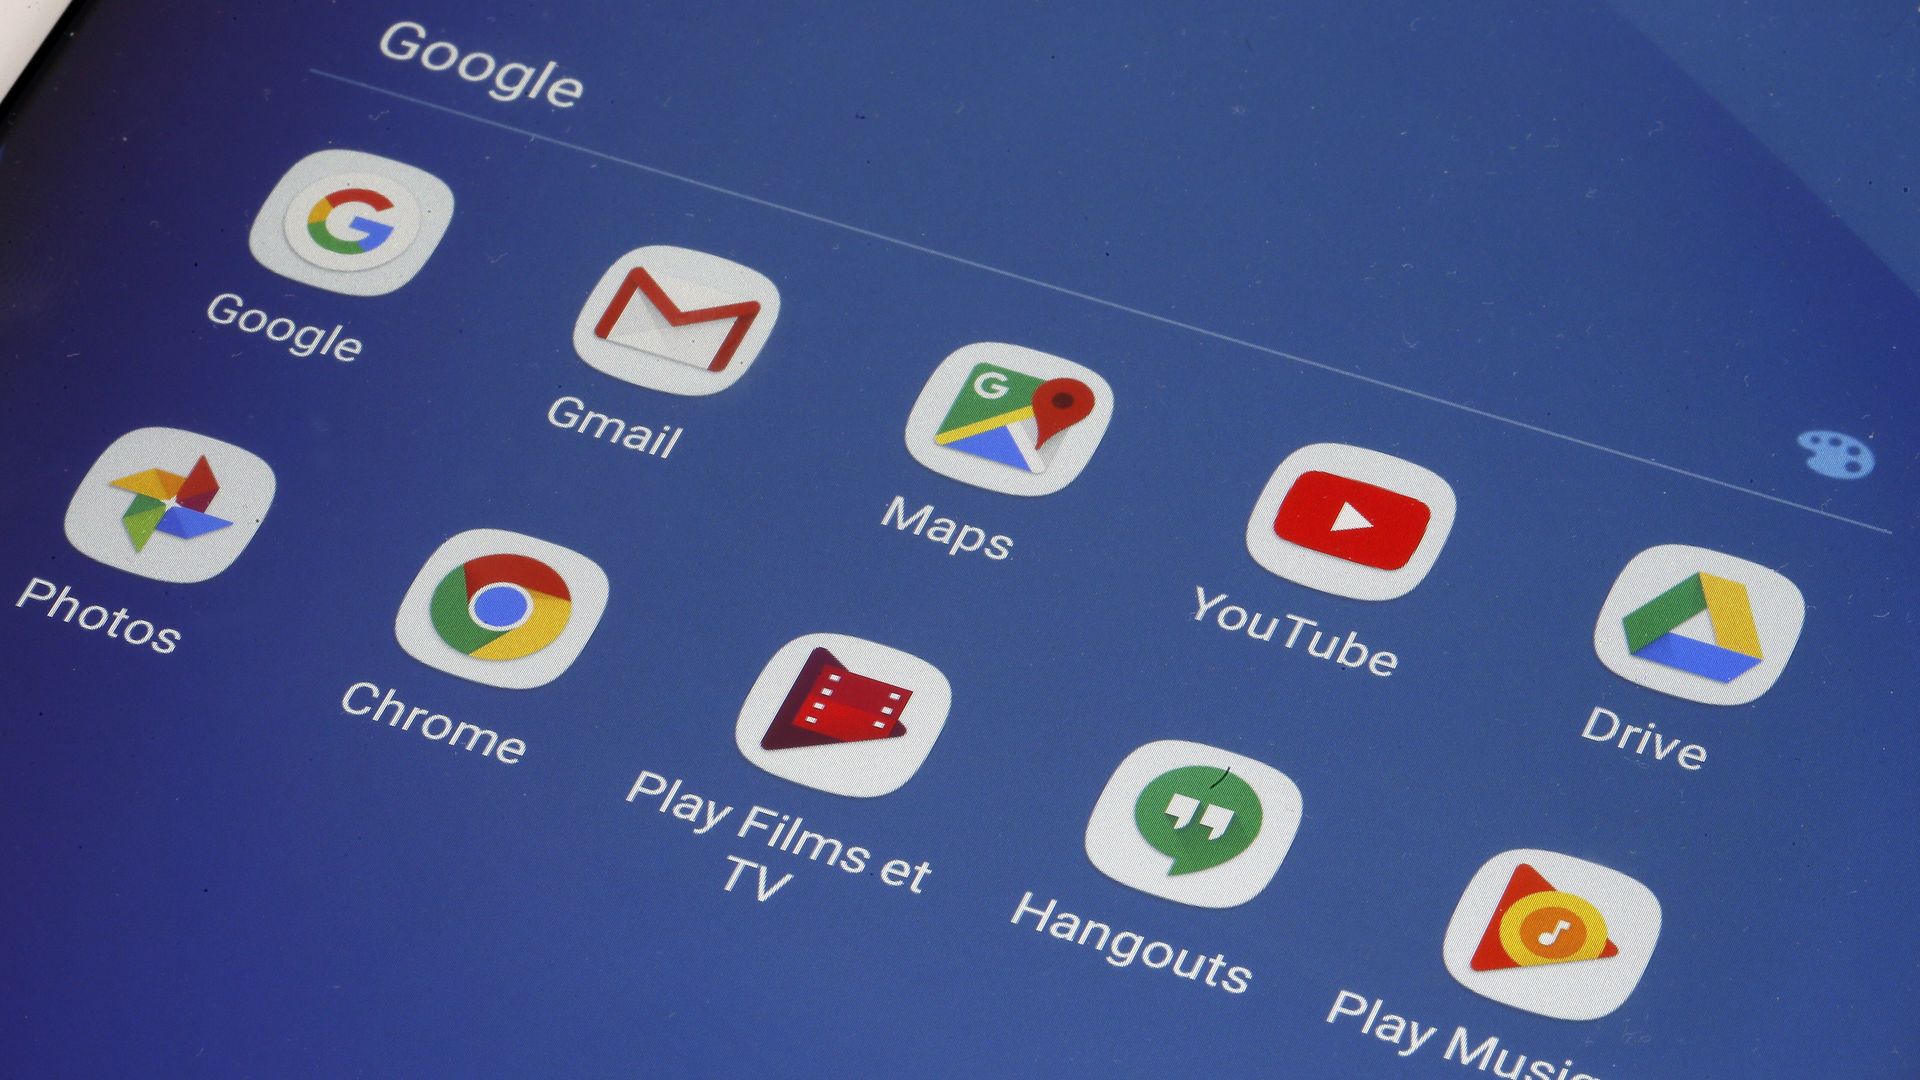 Google suite apps including youtube, chrome, hangouts, gmail etc. 